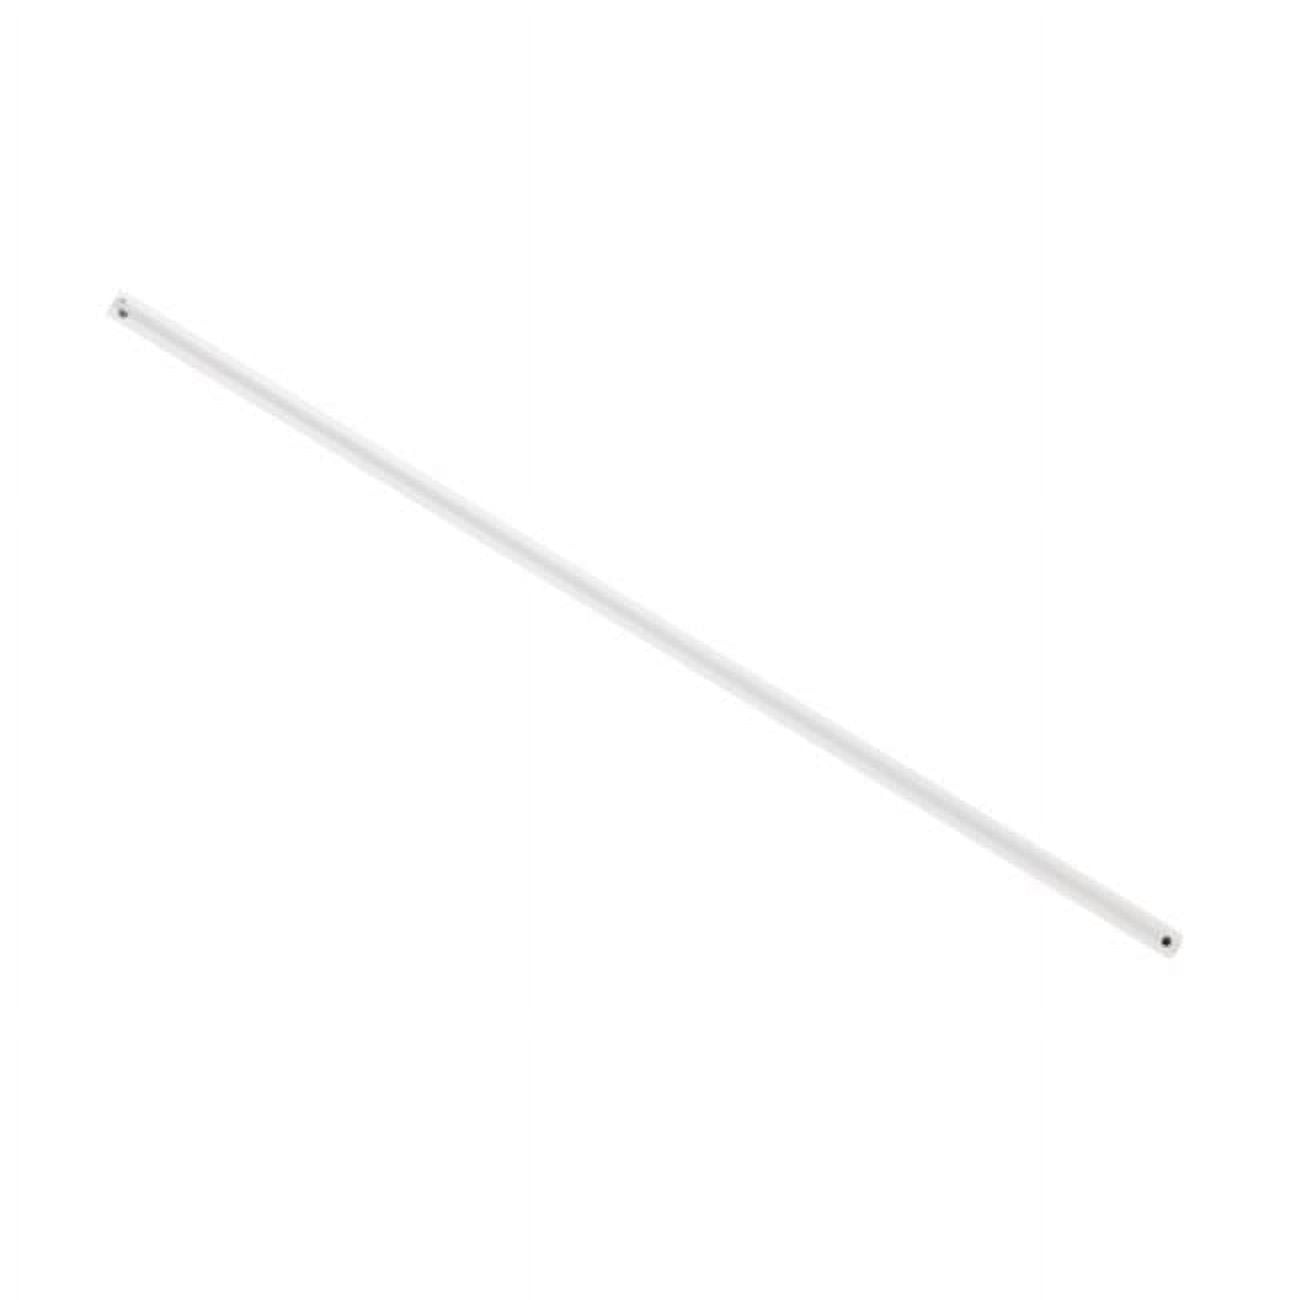 Picture of Lucci Air 21321812 Lucci Air Abyss White 12-inch Downrod